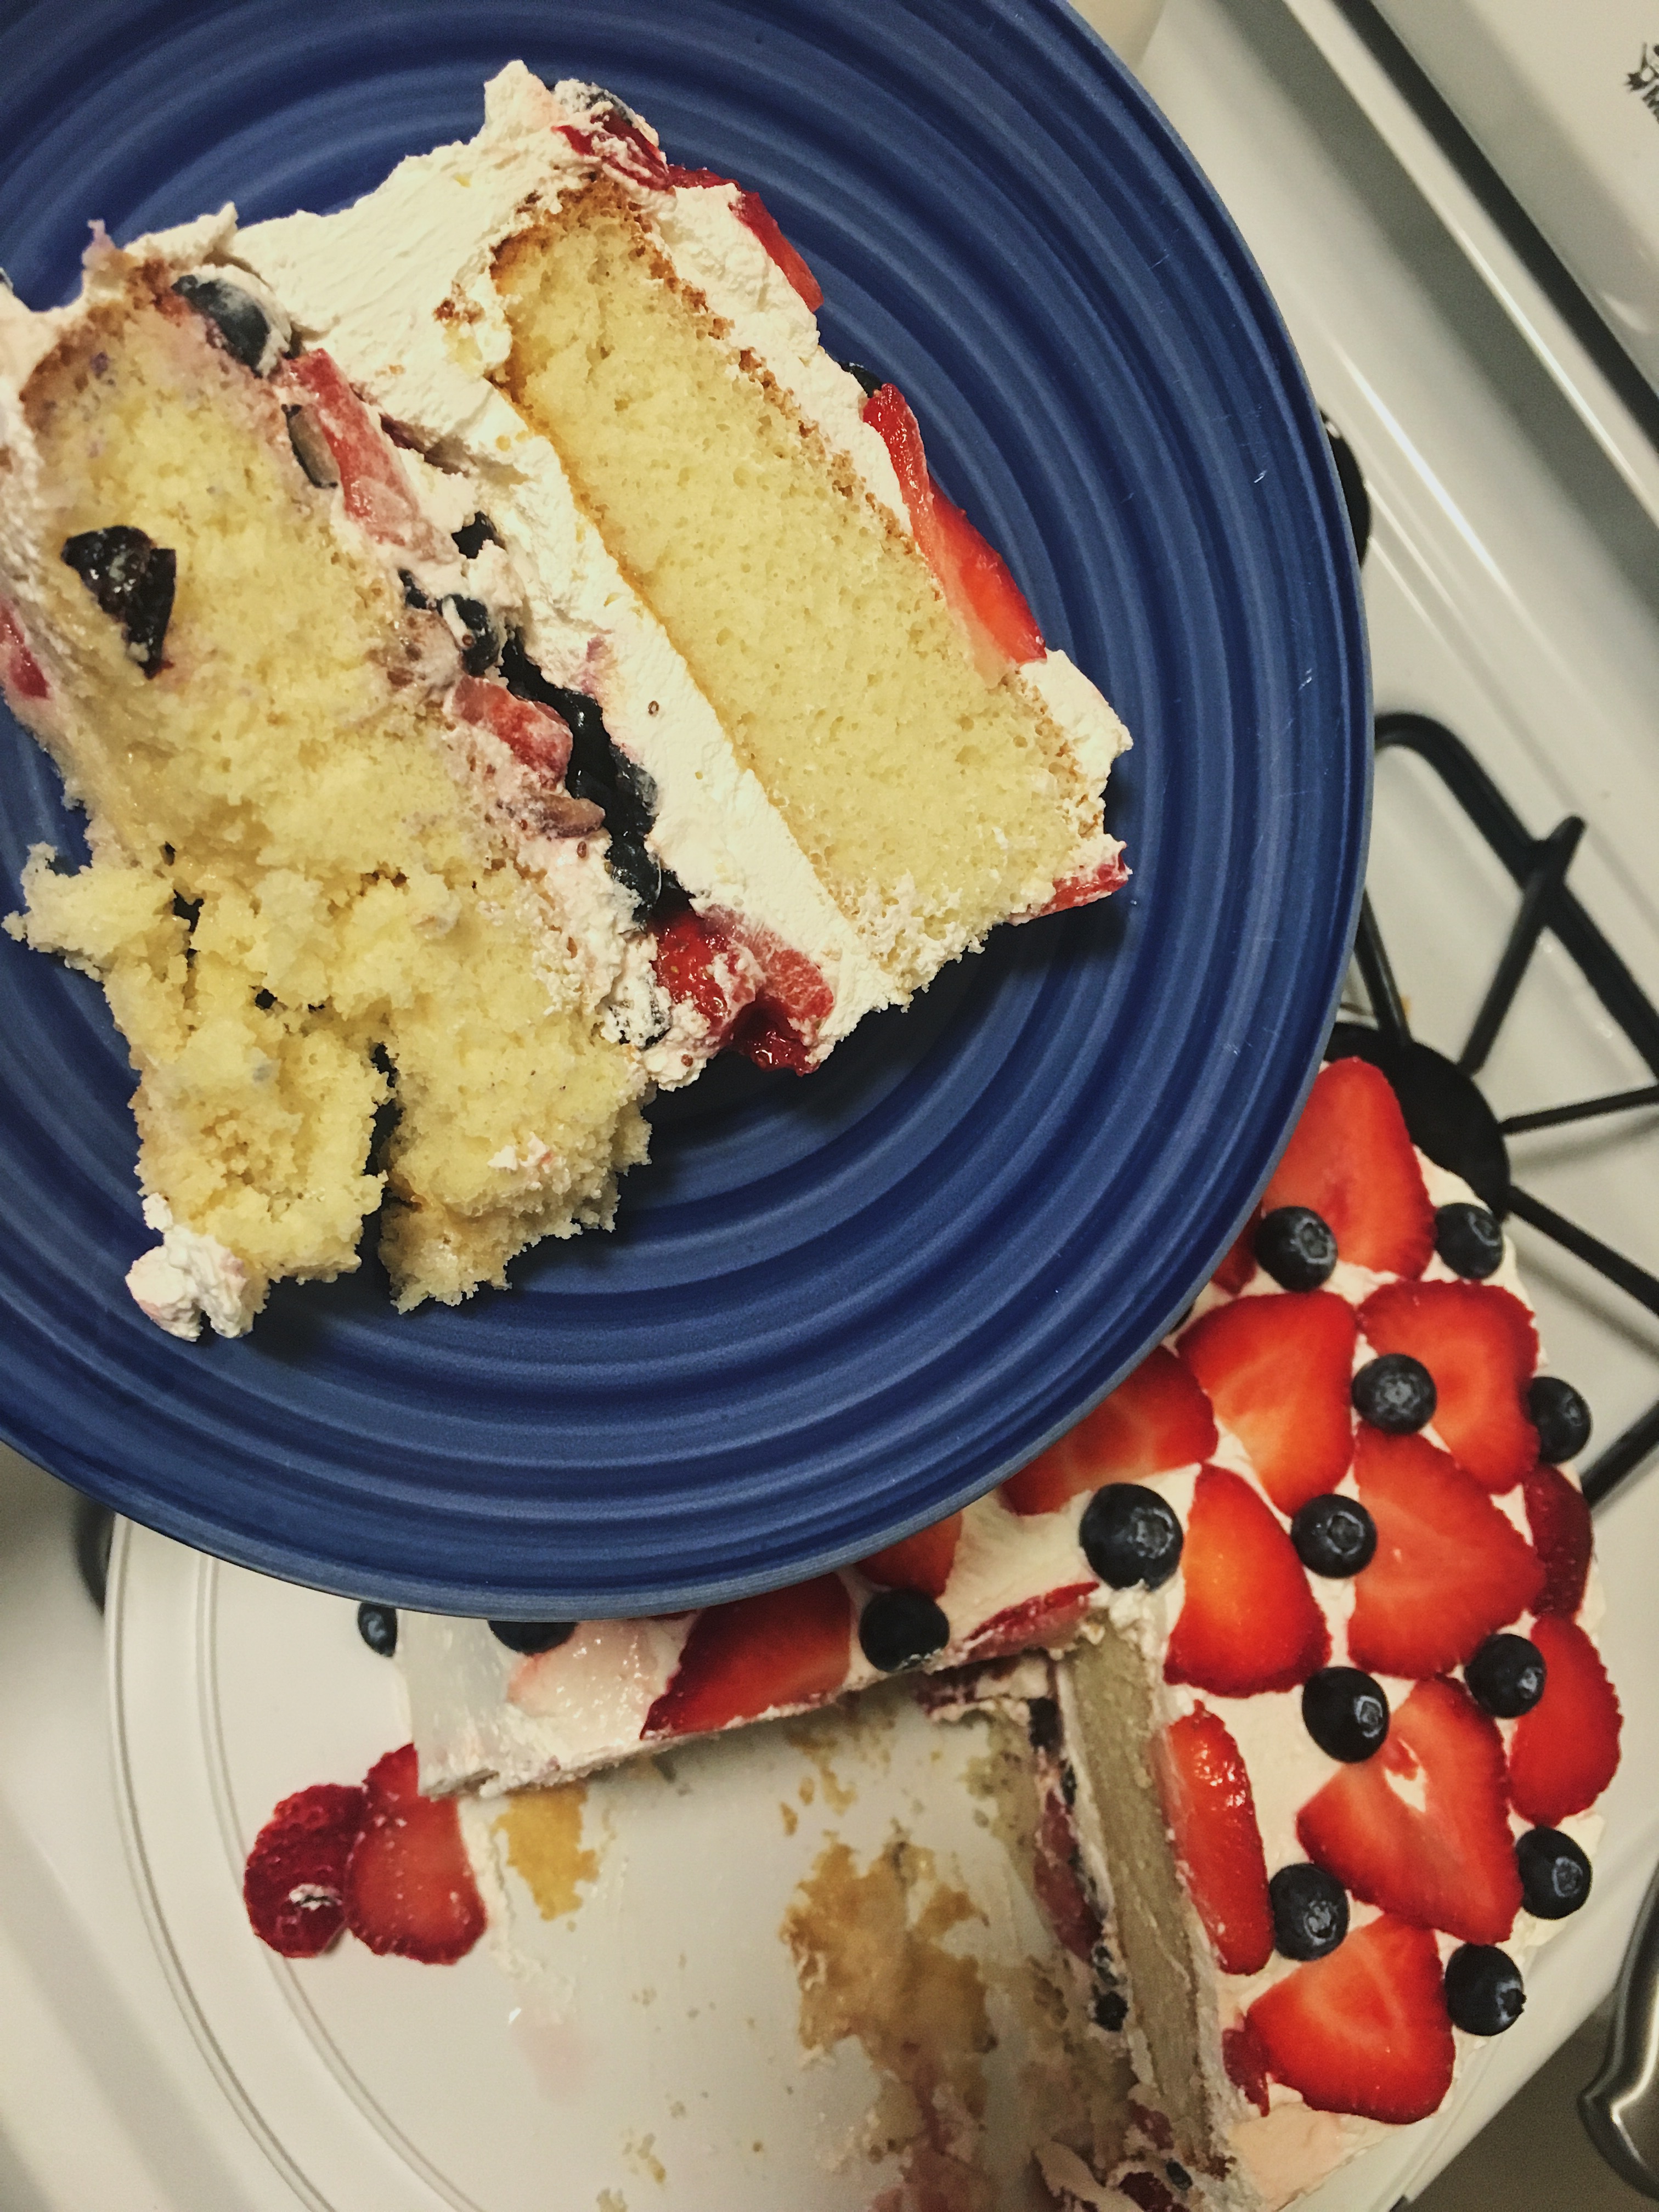 4th of july cake recipe-slice of 4th of july cake with strawberries and blueberries